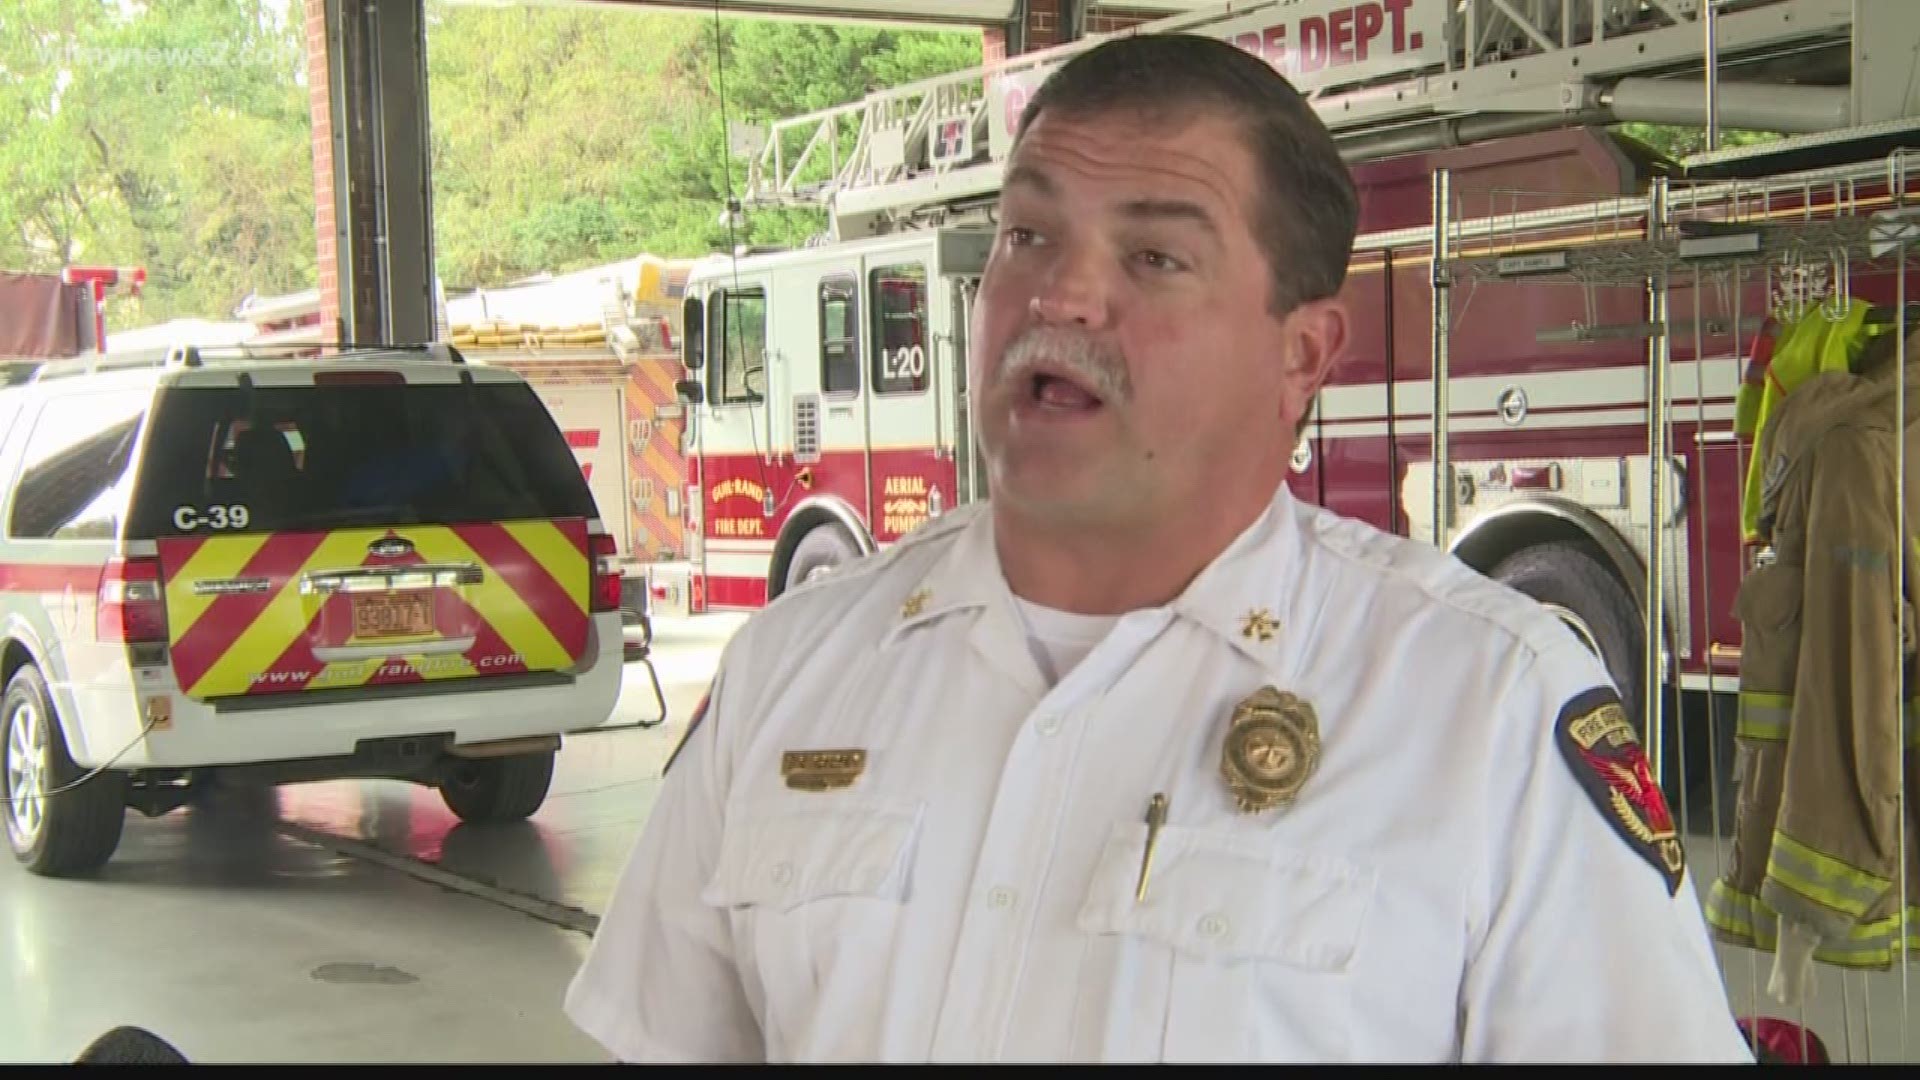 Archdale fire department deals with Volunteer fire fighter shortage like most of the state.